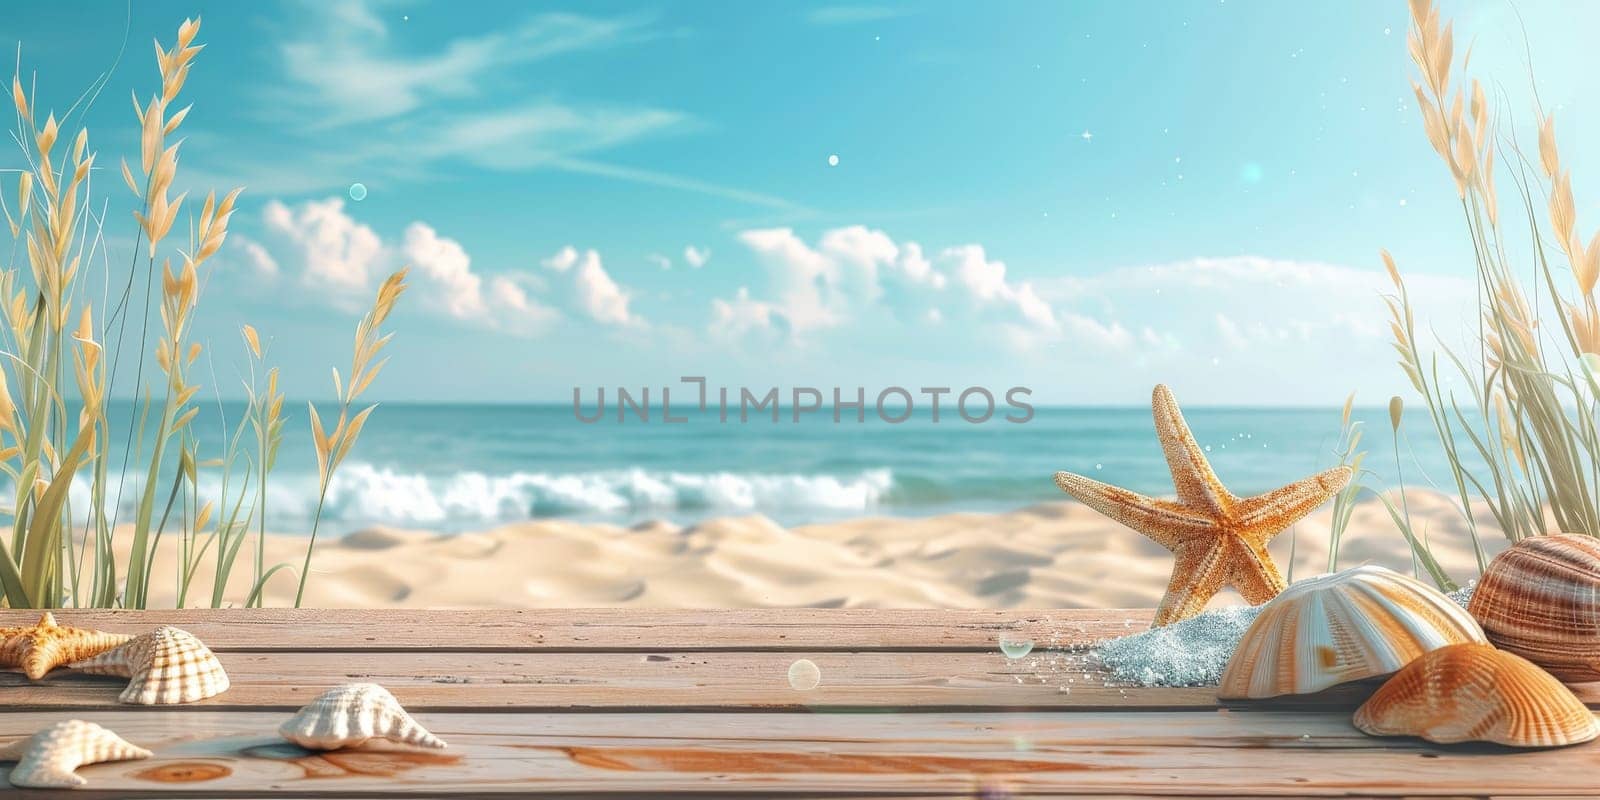 A beach scene with a wooden table and a starfish and shells on it. Scene is calm and relaxing, as it depicts a peaceful beach setting